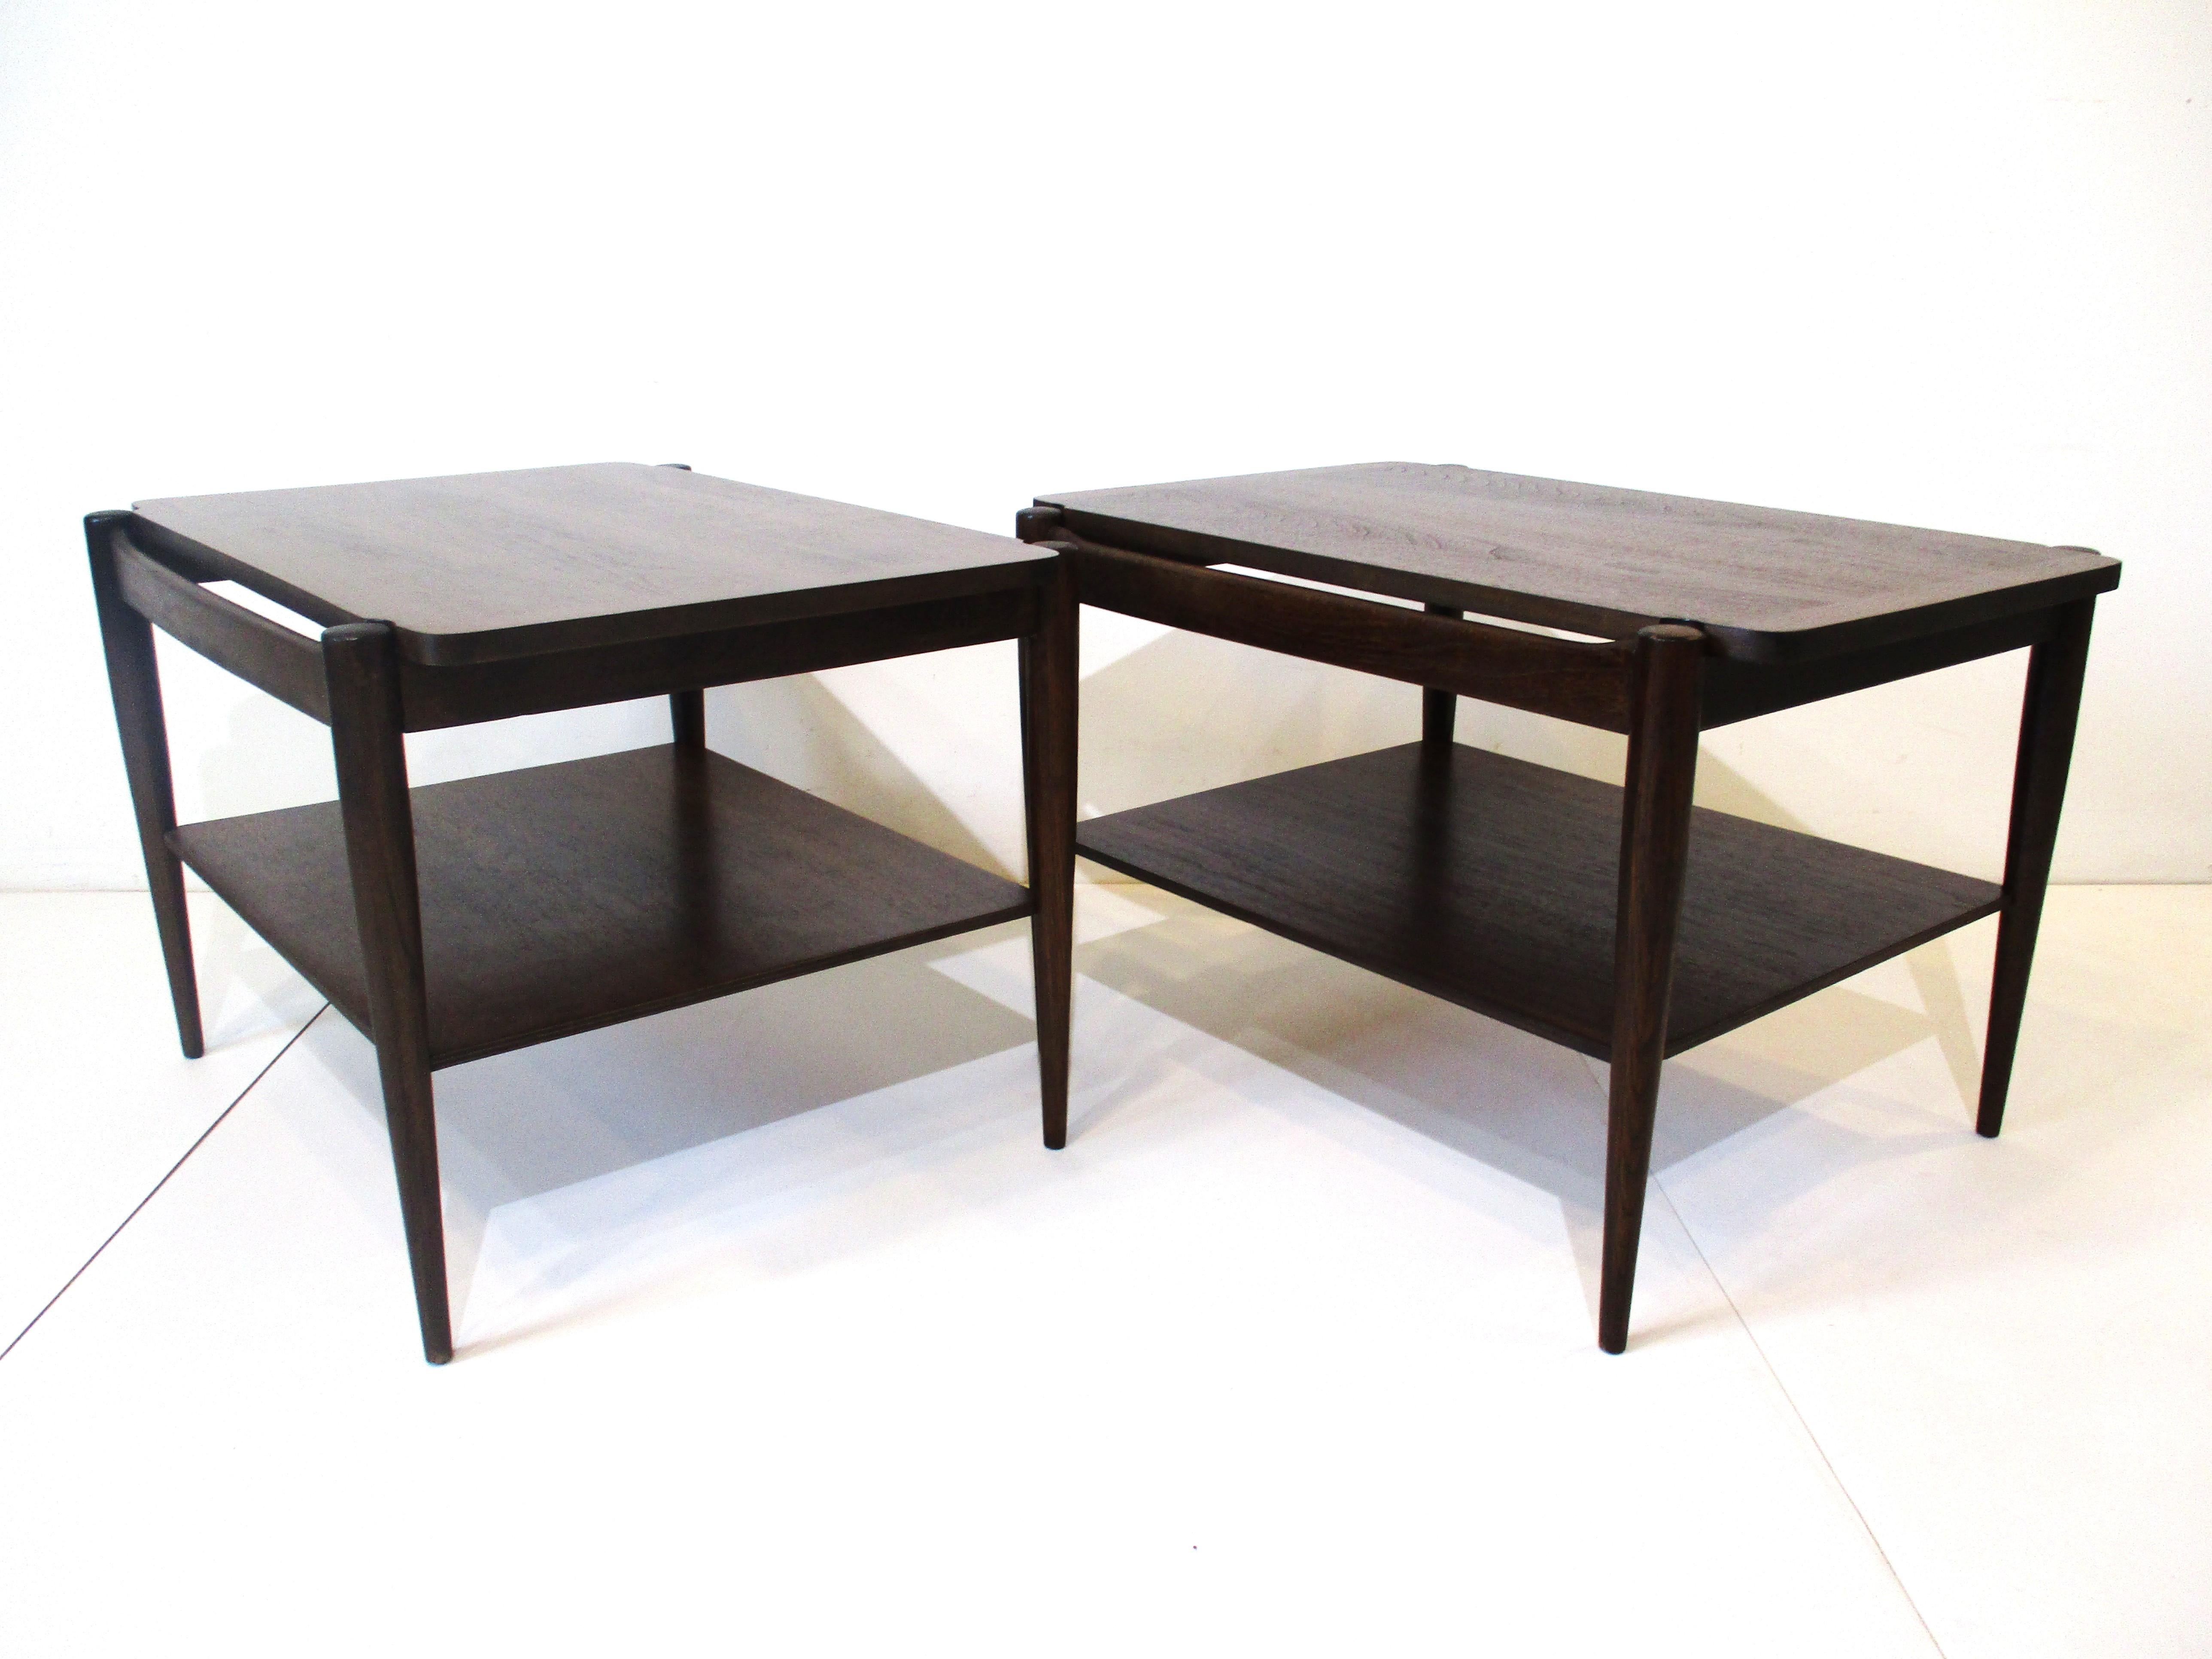 A pair of dark walnut end tables with lower shelve and long thin legs making for a light feeling . The top has wonderful graining with cut out corners for the legs in the style of Grete Jalk and danish modern . Manufactured by the Bassett furniture